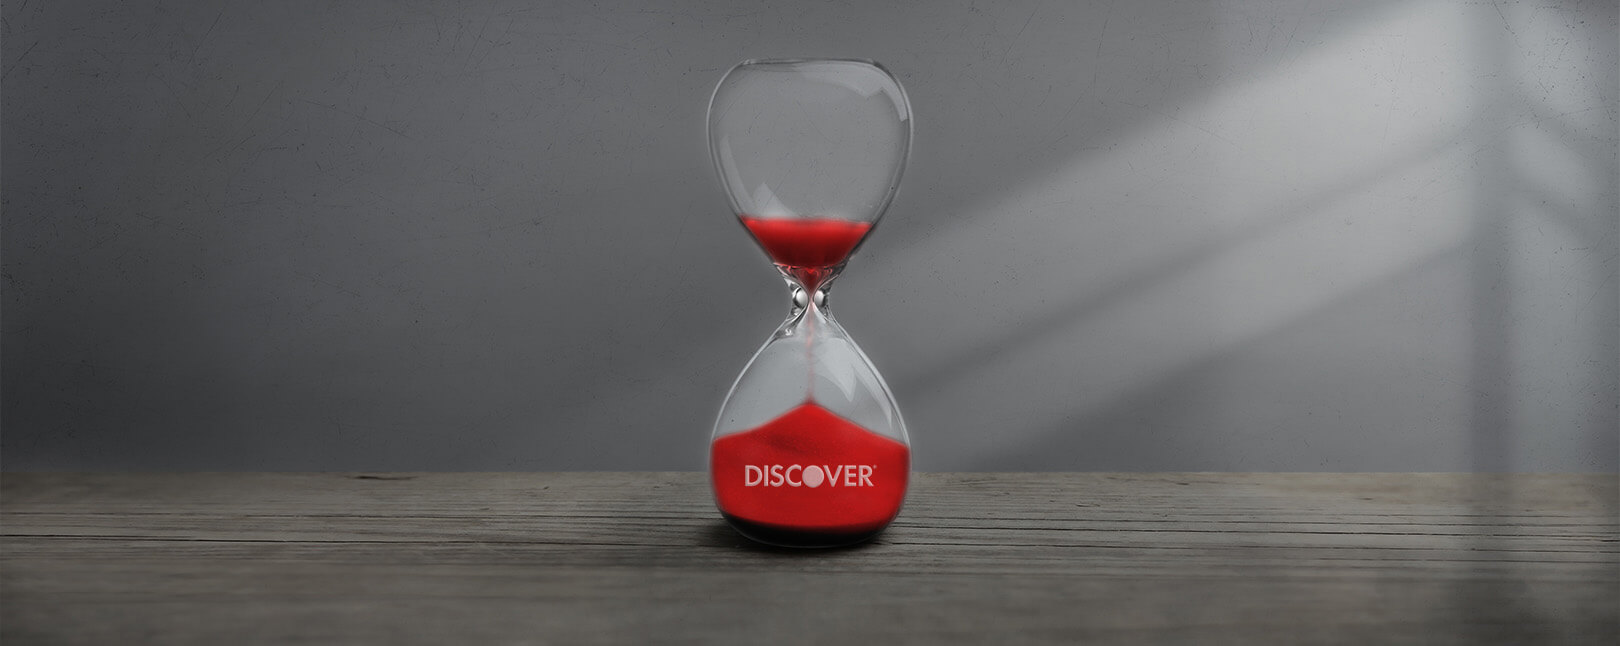 Discover chargeback time limit